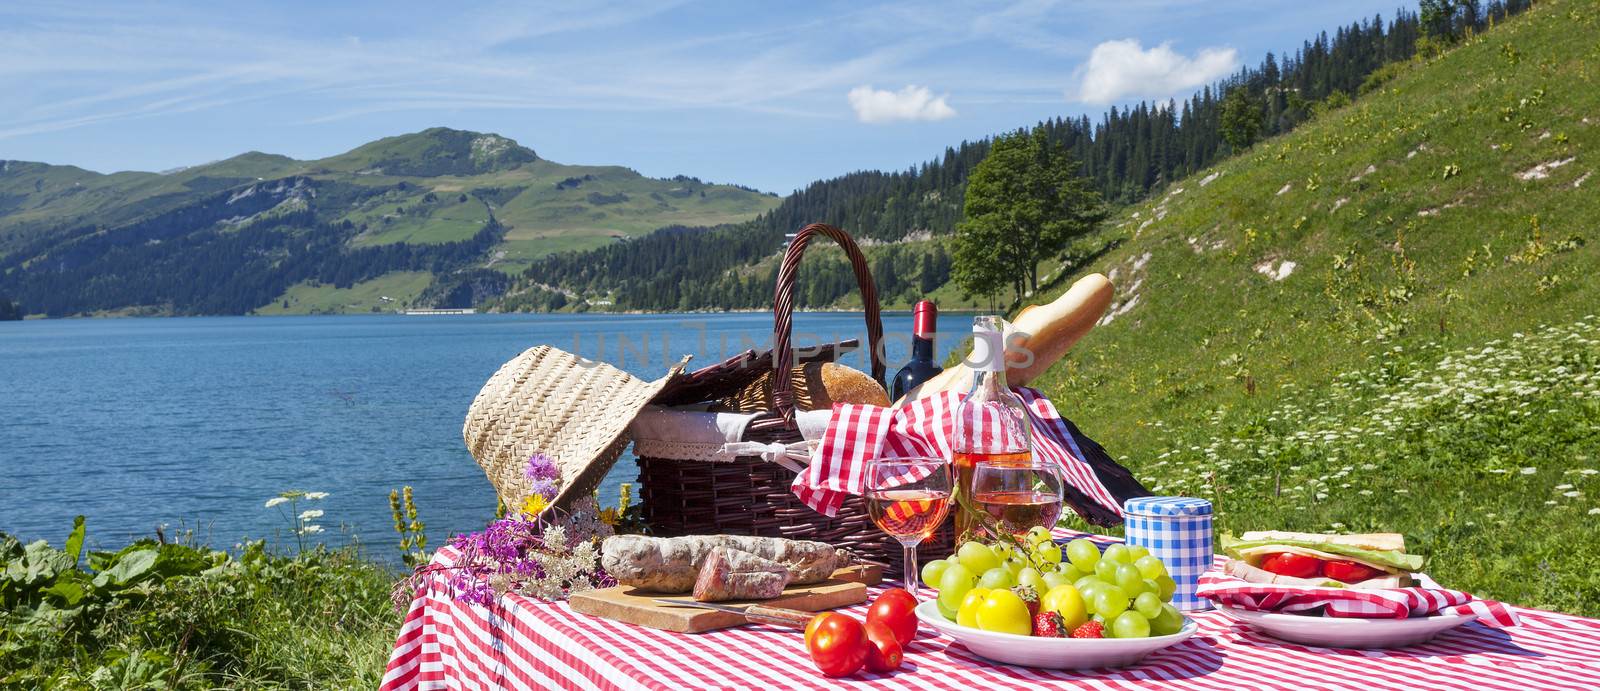 Picnic in french alps with lake  by vwalakte